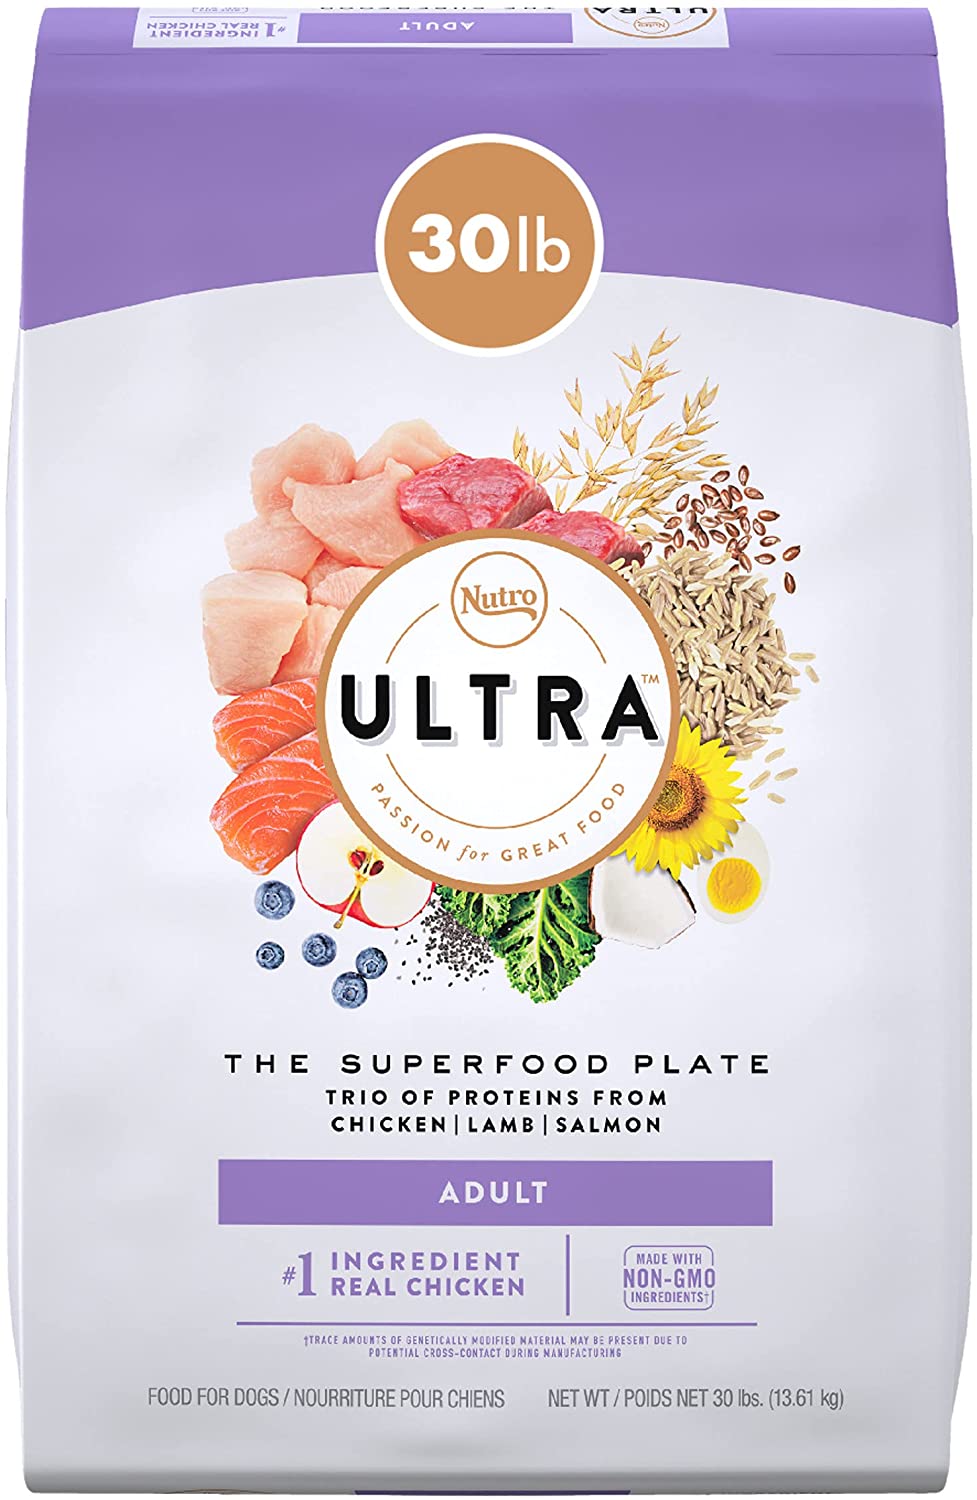 30LB Nutro Ultra Superfood Plate Chicken, Lamb & Salmon Adult Dry Dog Food $41.99